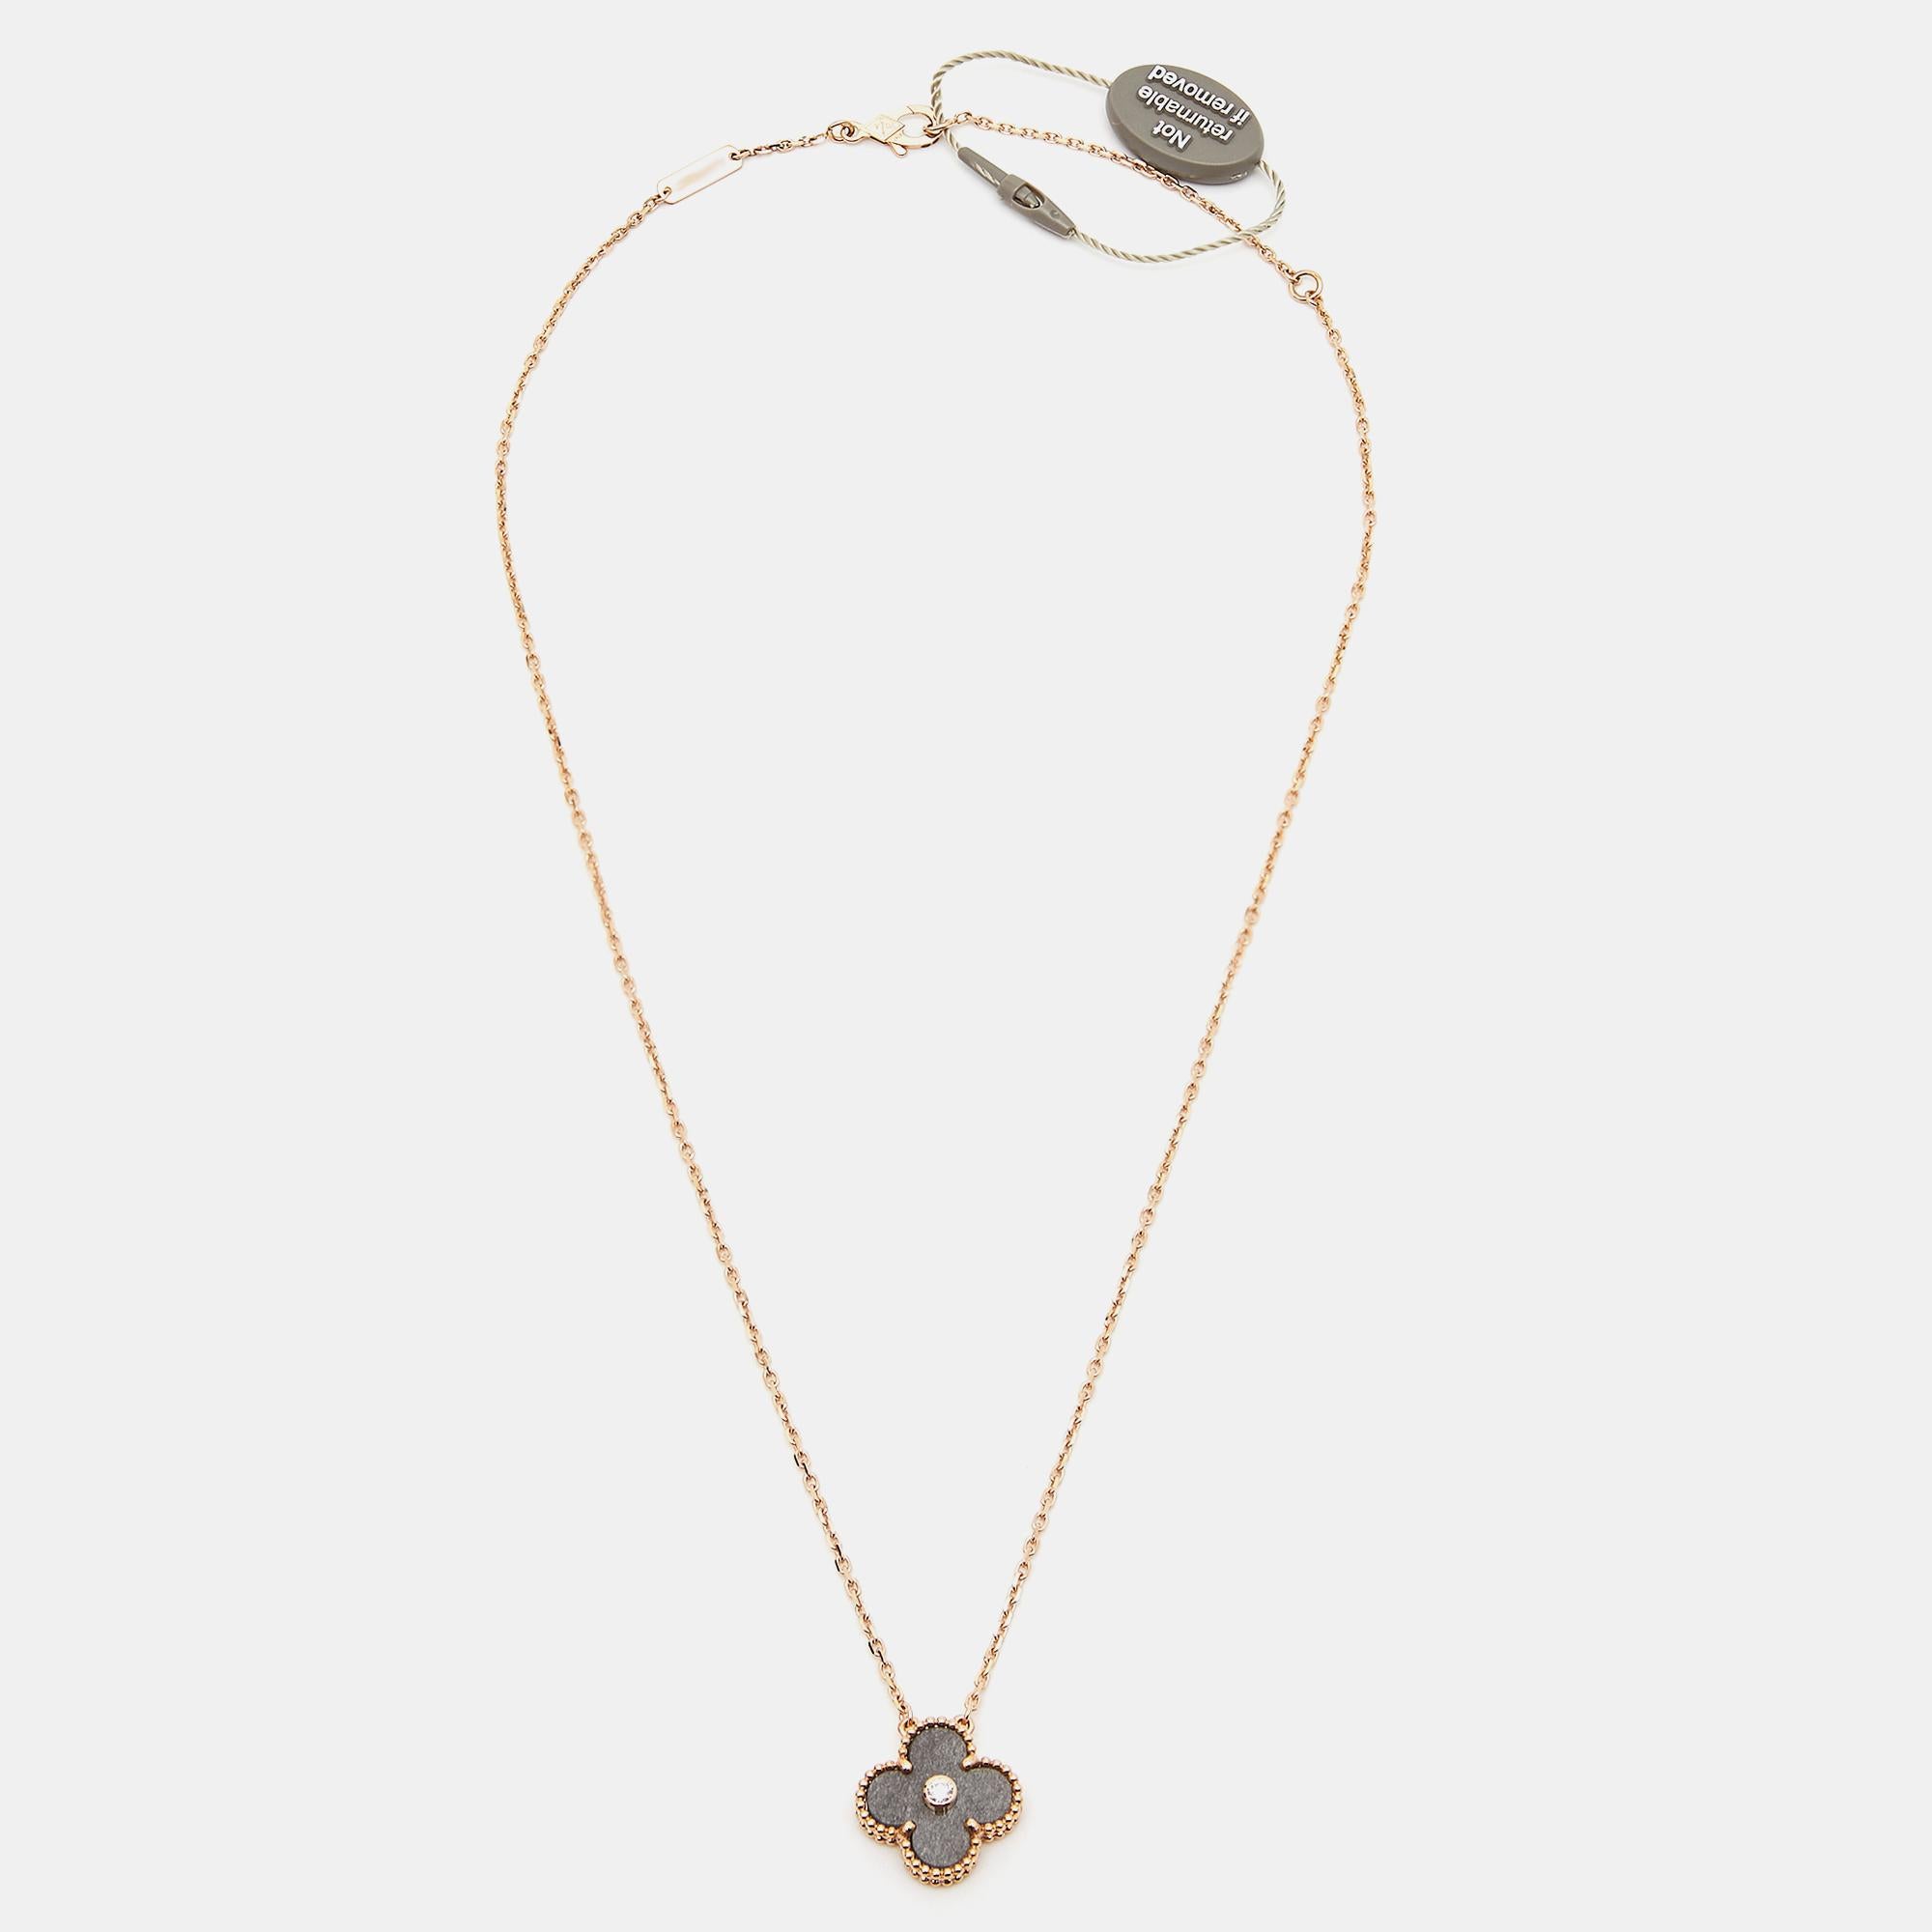 Invest in this opulent Van Cleef & Arpels 2023 Holiday pendant necklace from their iconic Vintage Alhambra collection. The 18k rose gold Alhambra pendant is set with a single diamond stud and held by a chain. A sweet mix of minimalist style and